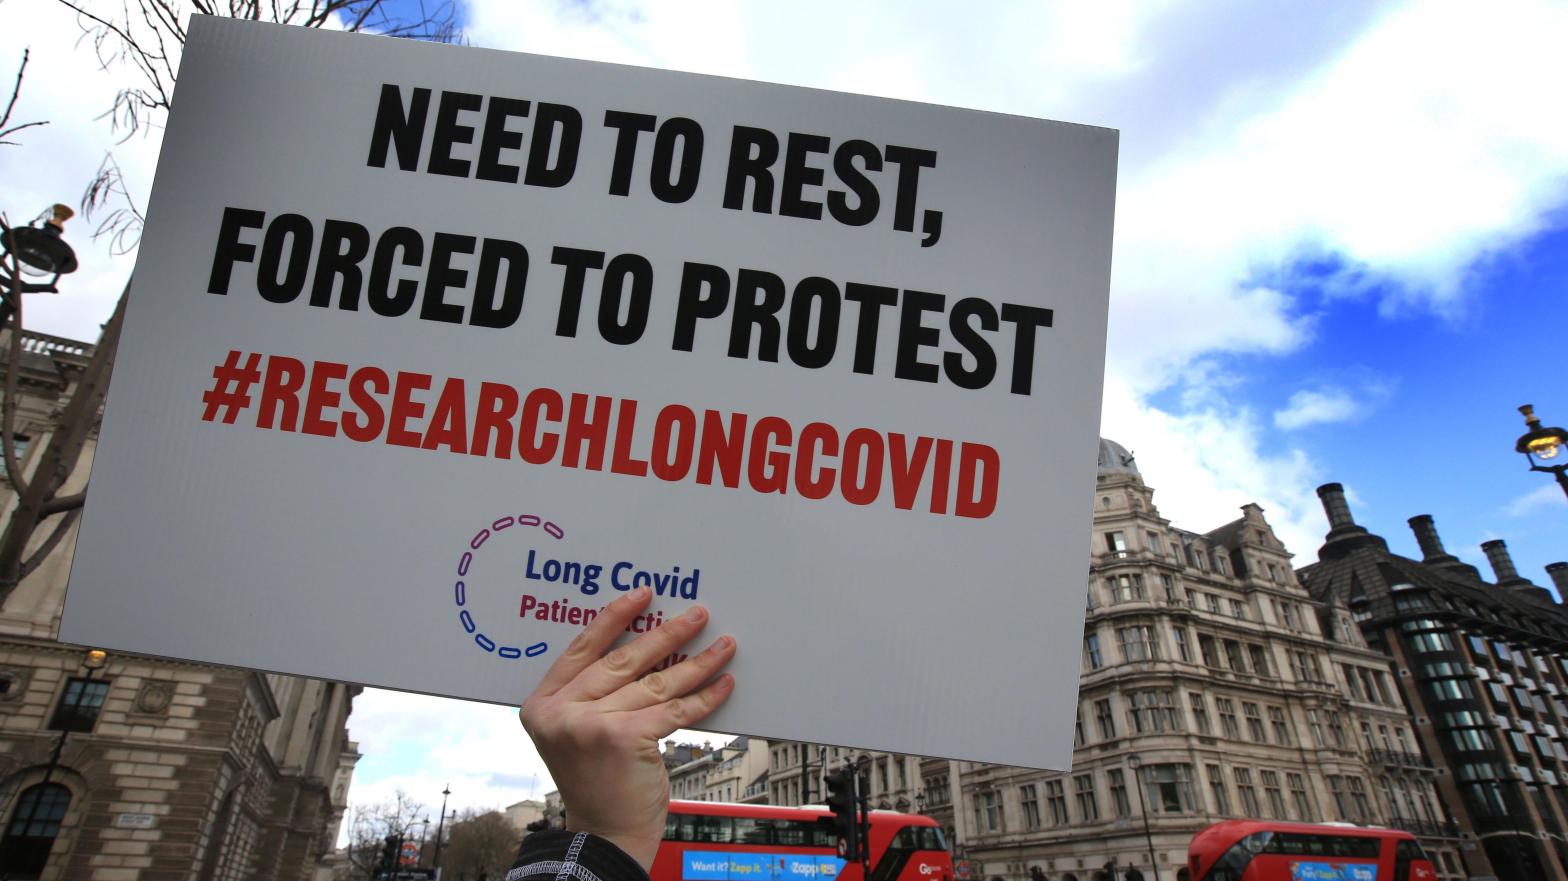 A protester holds up a placard demanding research into long covid during a demonstration in the UK this March. (Photo: Martin Pope/SOPA Images/LightRocket, Getty Images)